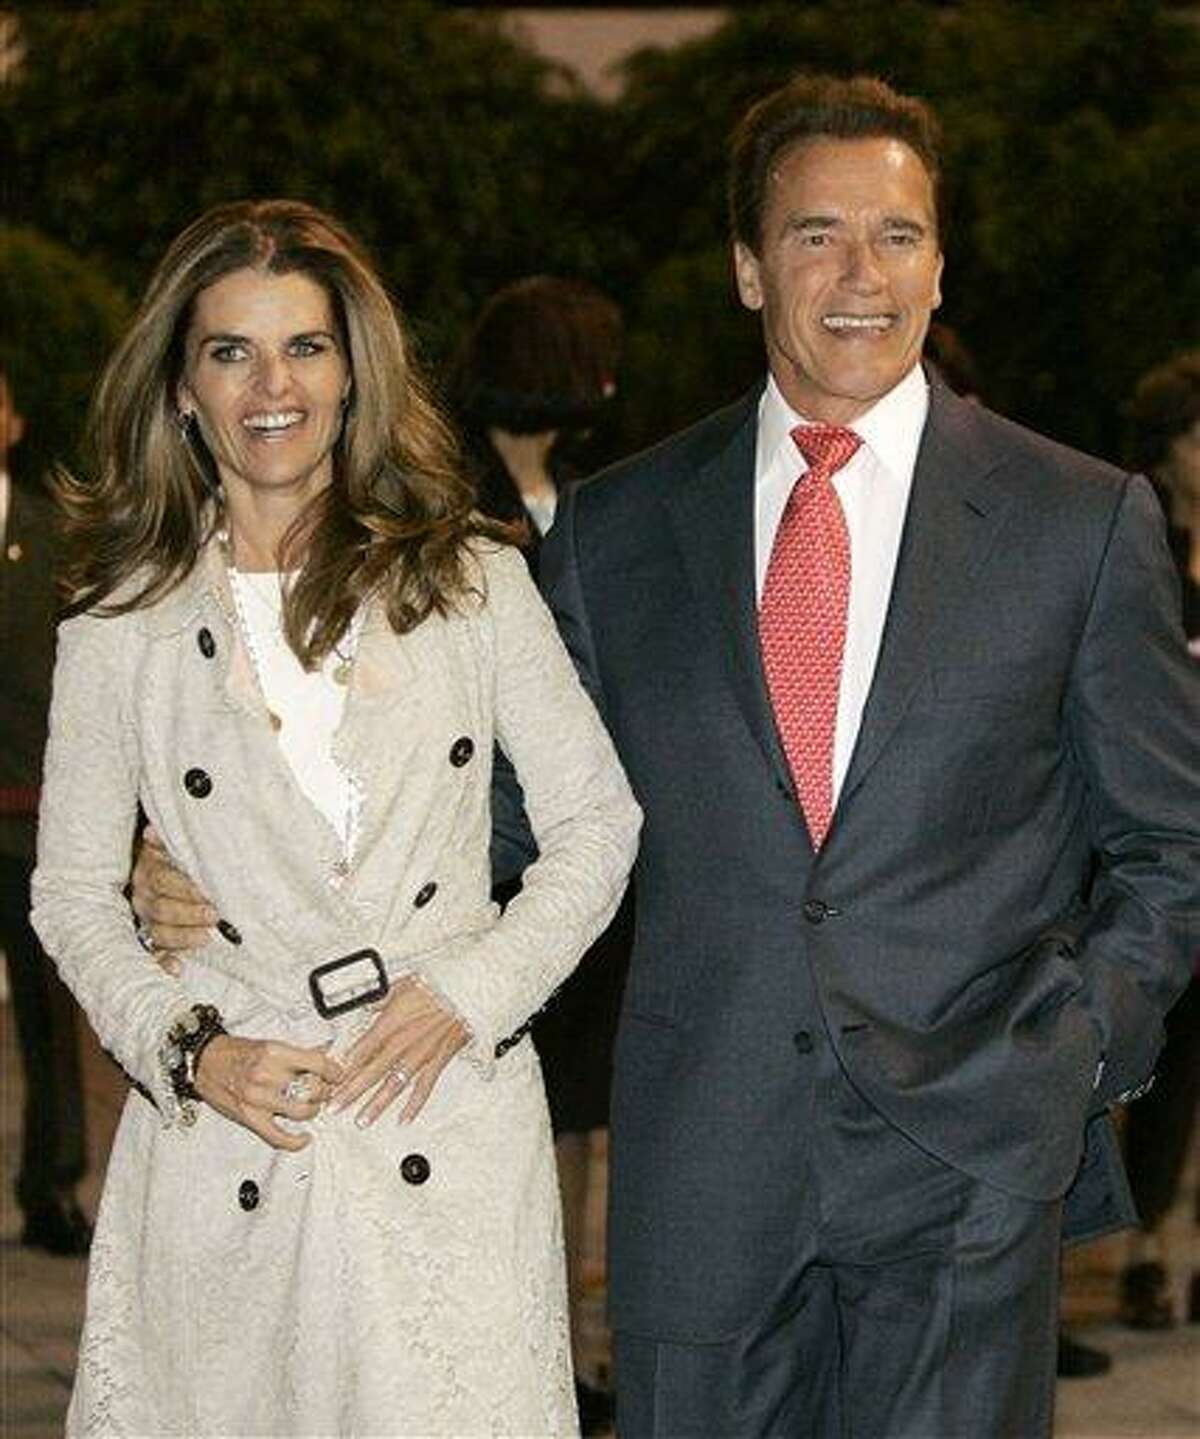 FILE - In this Nov. 8, 2006 file photo, California Gov. Arnold Schwarzenegger arrives in Mexico City, Mexico, with his wife Maria Shriver. Maria Shriver has filed for divorce from Arnold Schwarzenegger in Los Angeles Superior Court, Friday, July 1, 2011. (AP Photo/Marcio Jose Sanchez, file)